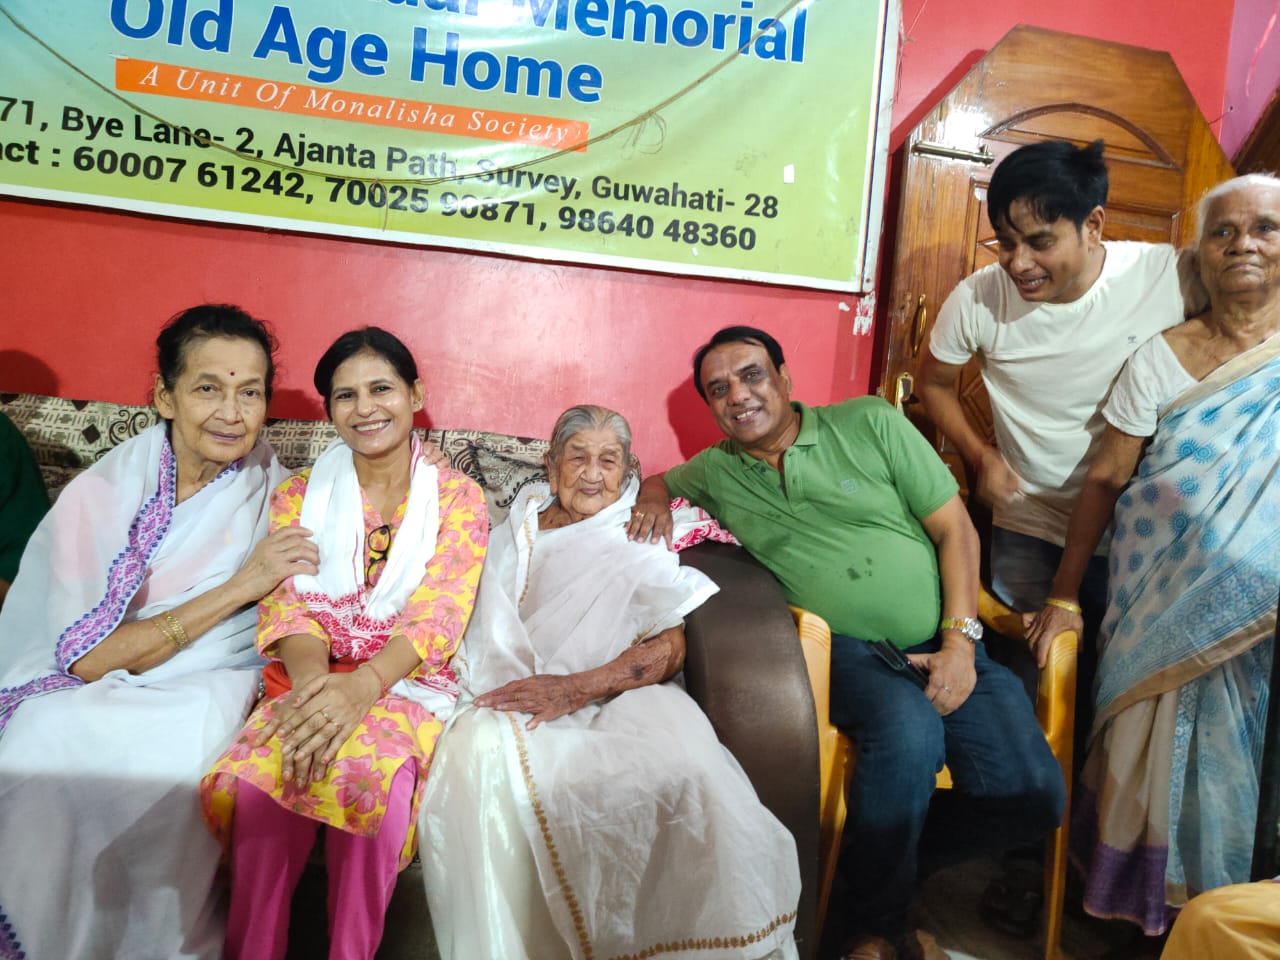 Donation in Mothers’ Old Age Home 02.10.2022